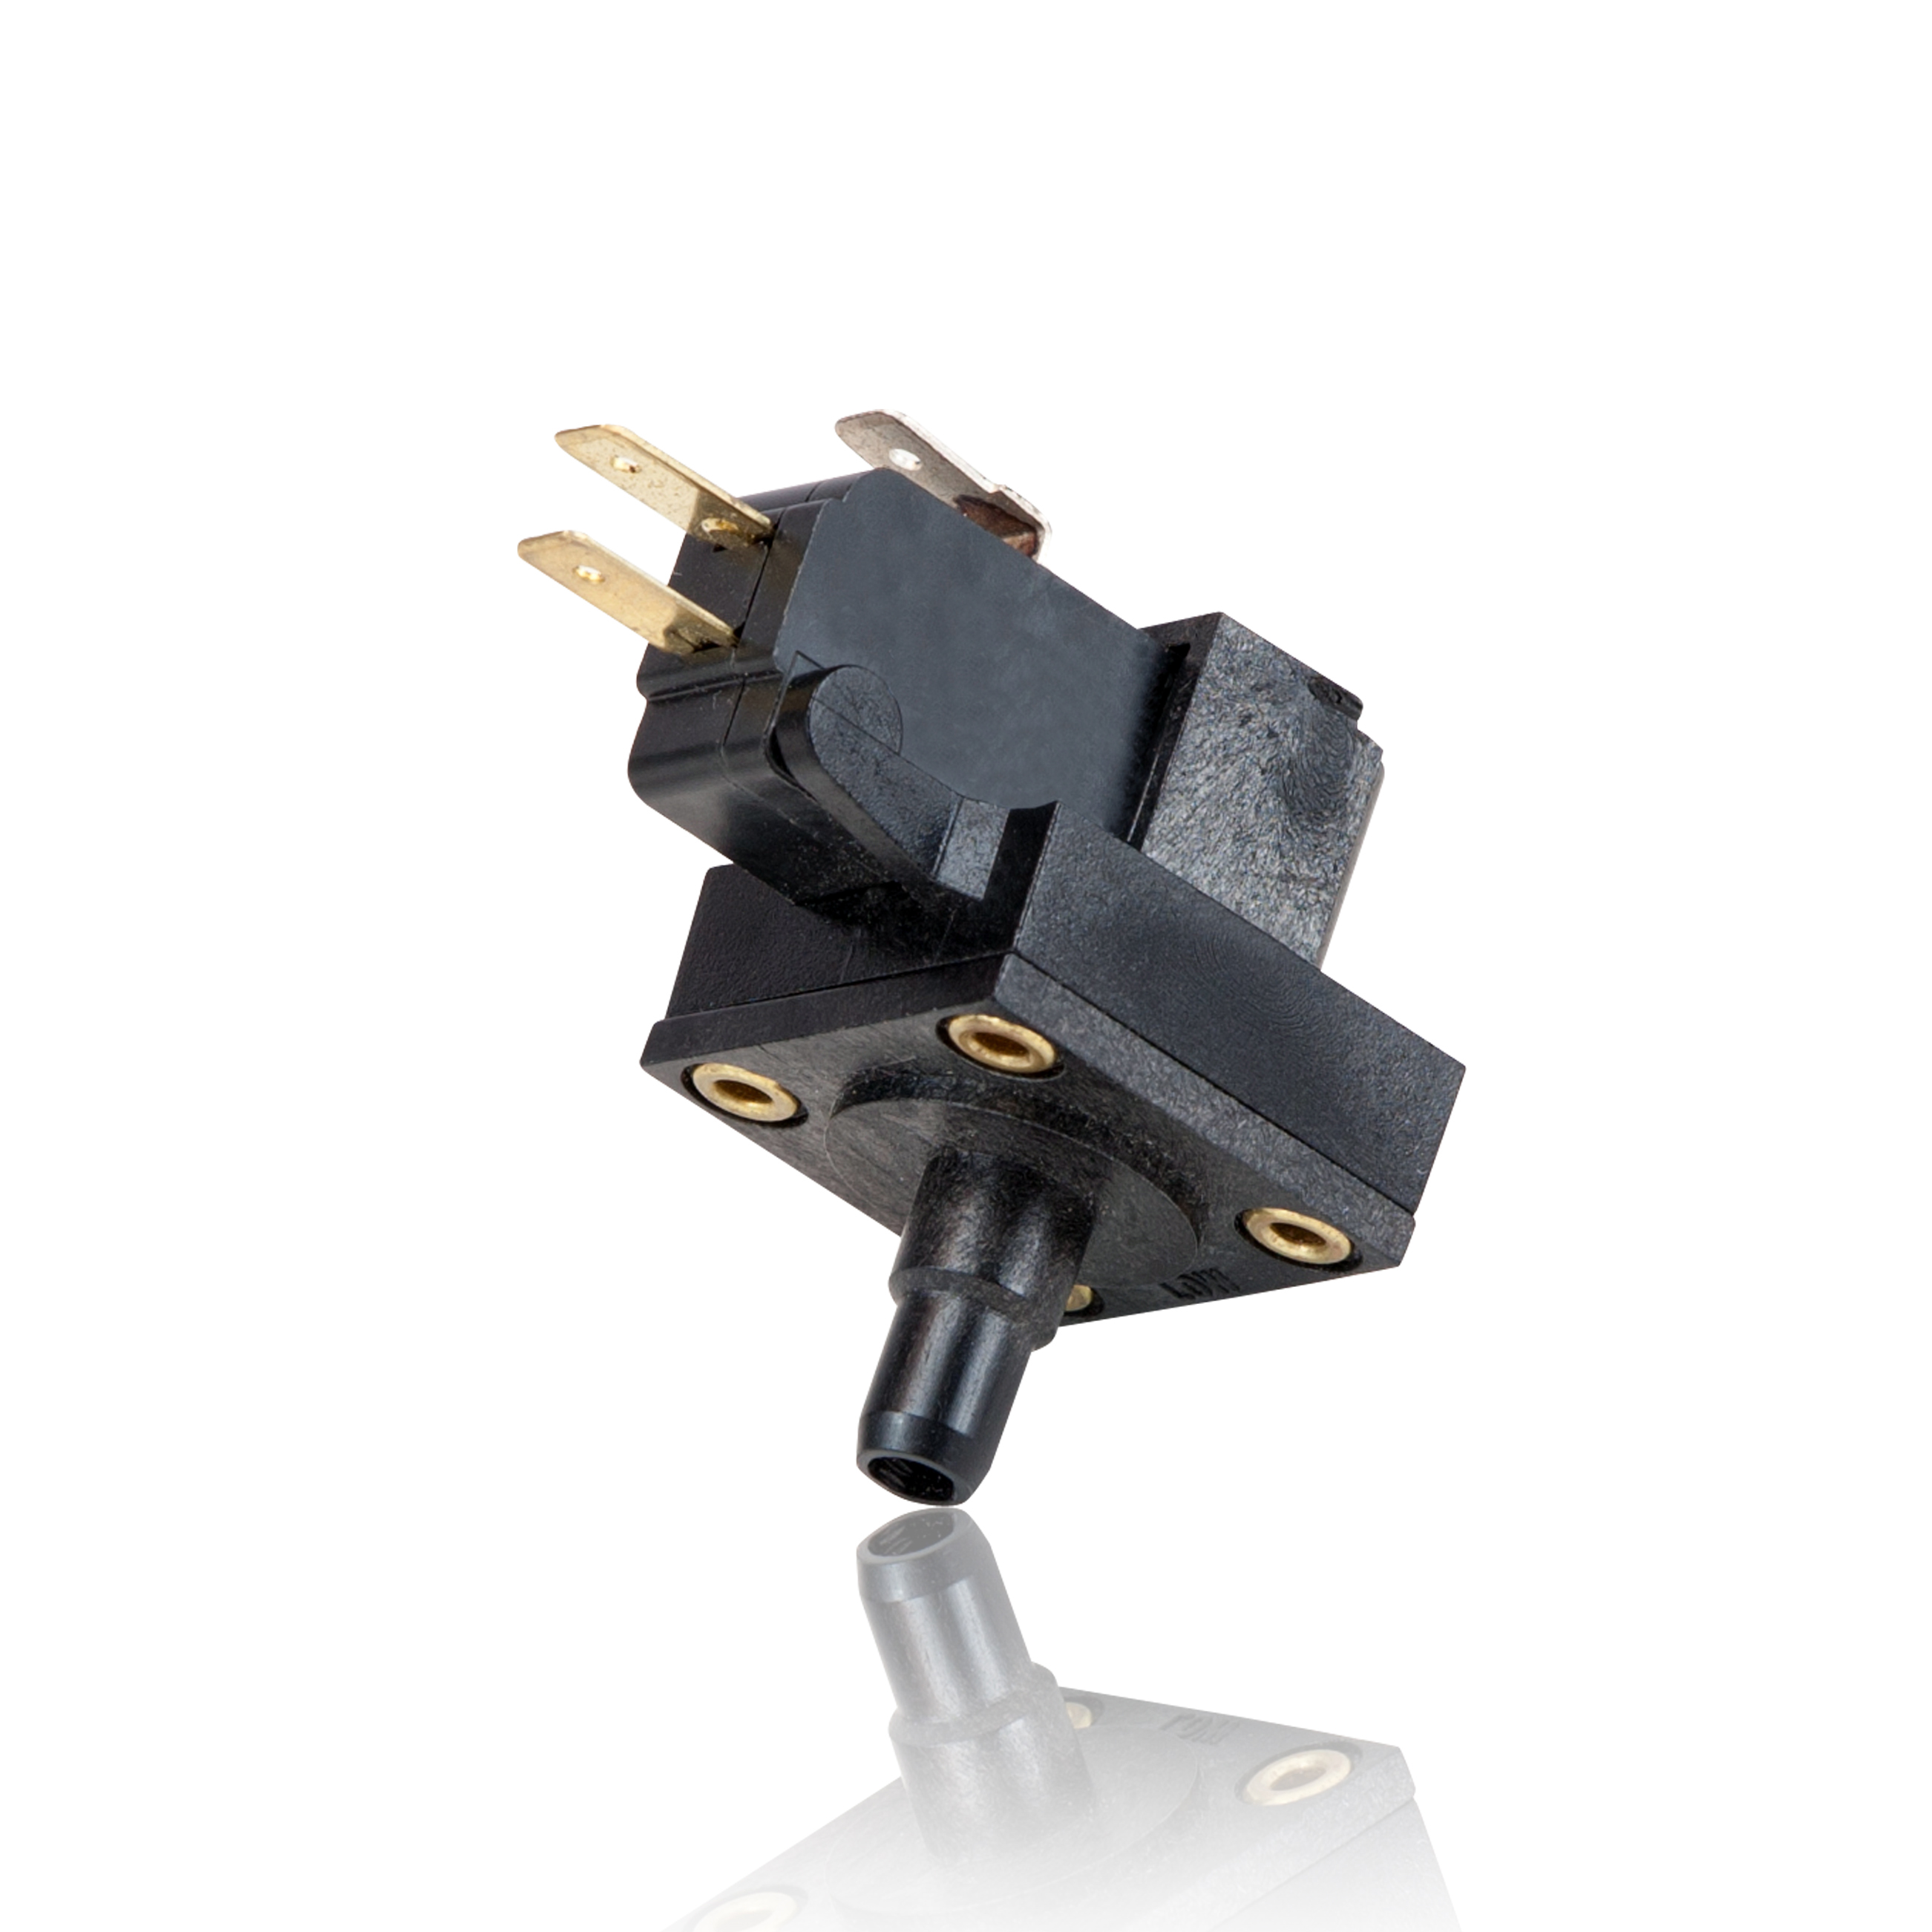 DesignFlex PSF109S High Current Vacuum Switch by World Magnetics. UL, RoHS, Made in USA.